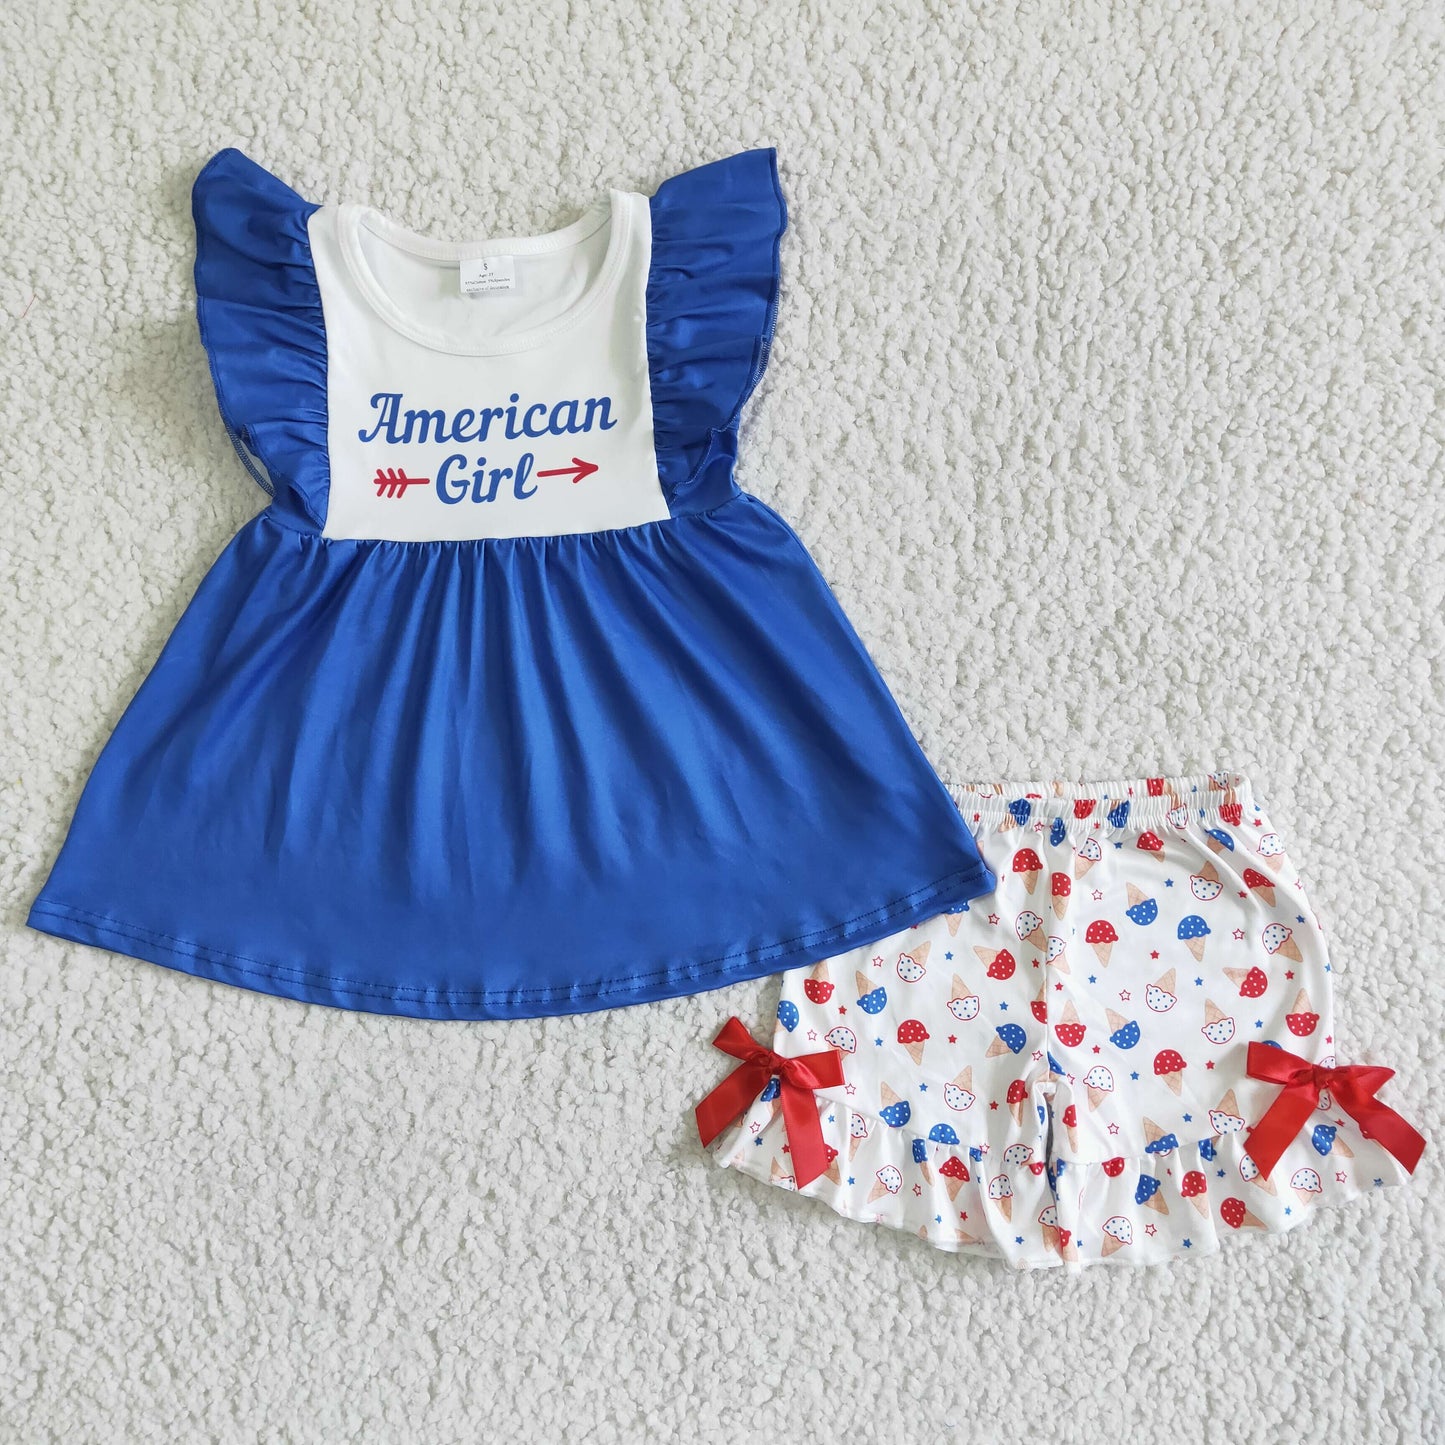 kids july 4th girl's clothes american girl outfit